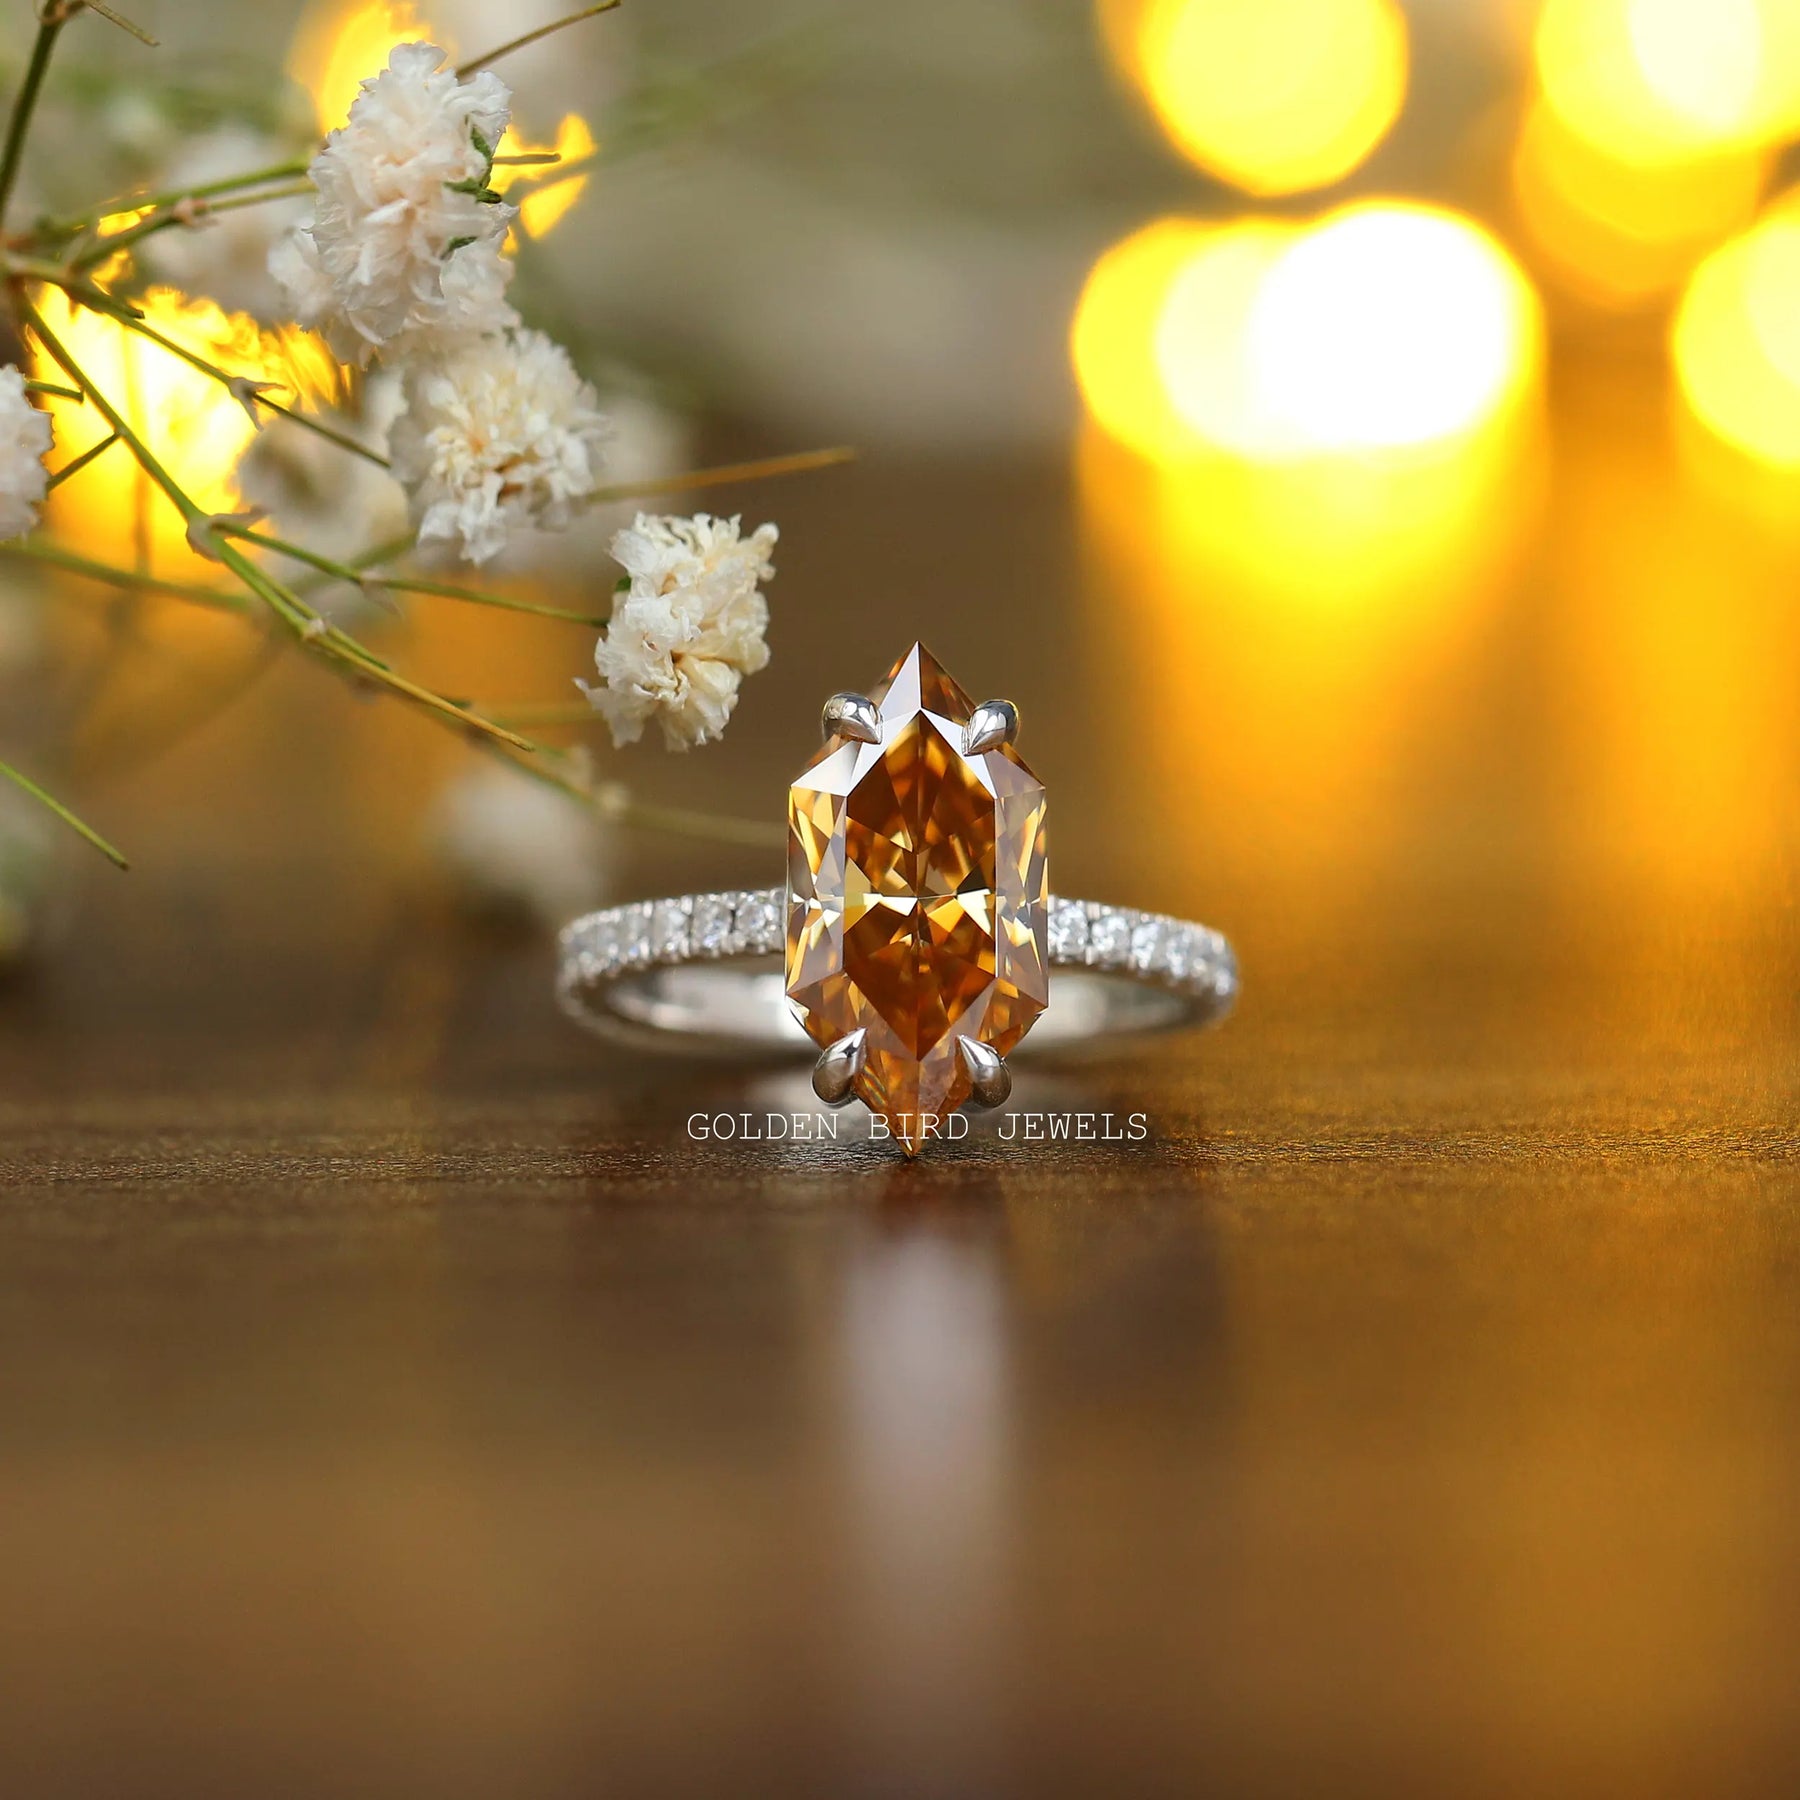 [Champagne Dutch Marquise Cut Moissanite Engagement Ring]-[Golden Bird Jewels]